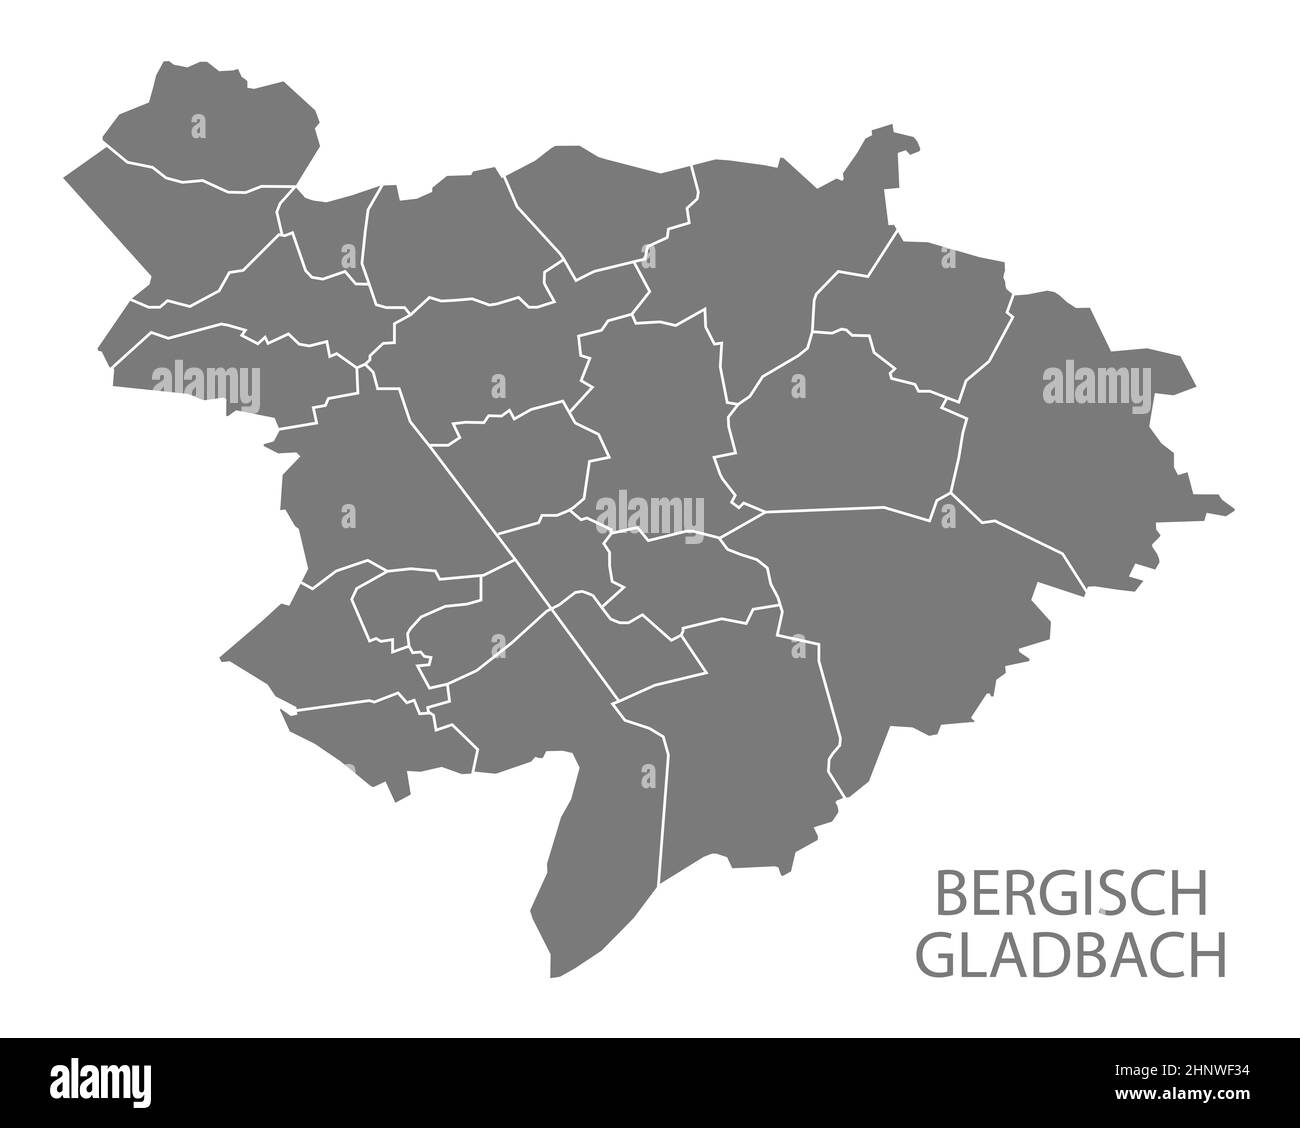 Modern City Map - Bergisch Gladbach city of Germany with districts grey DE Stock Photo